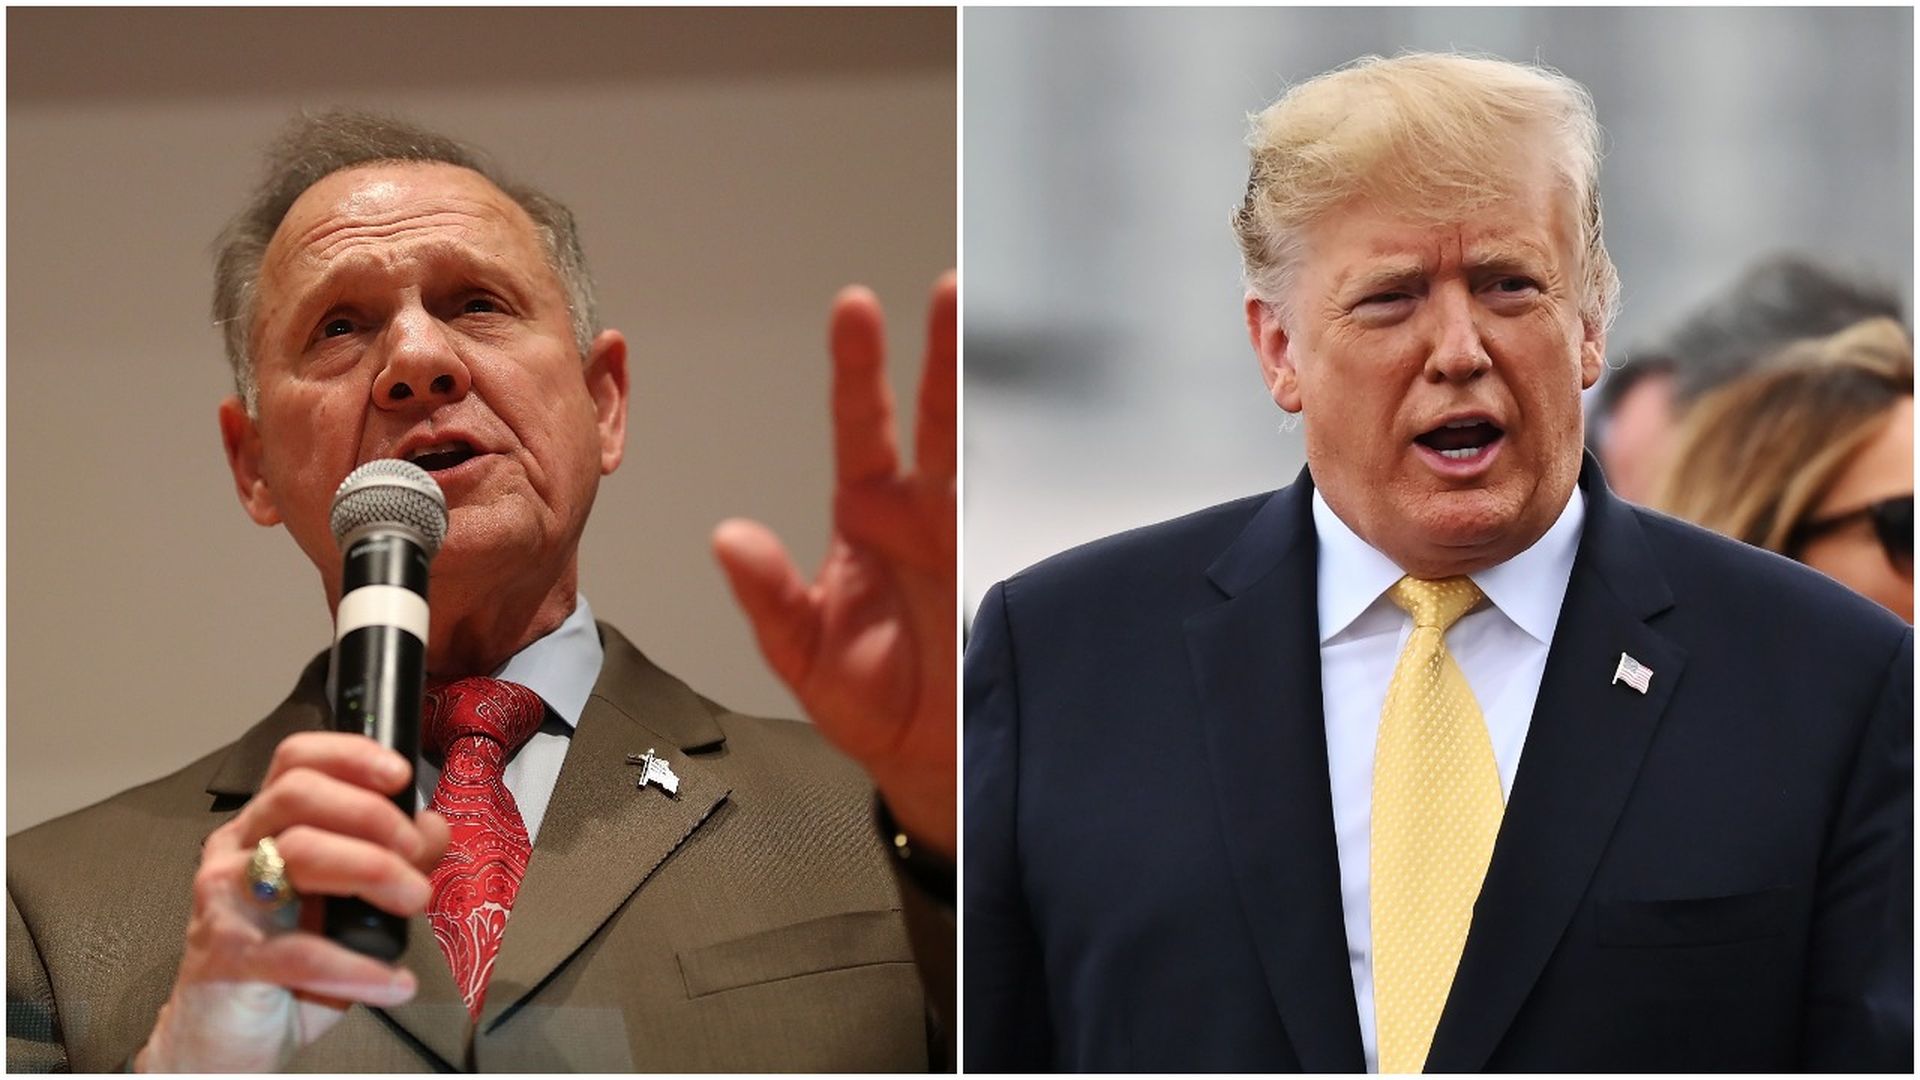 This image is a split screen of Moore and Trump.